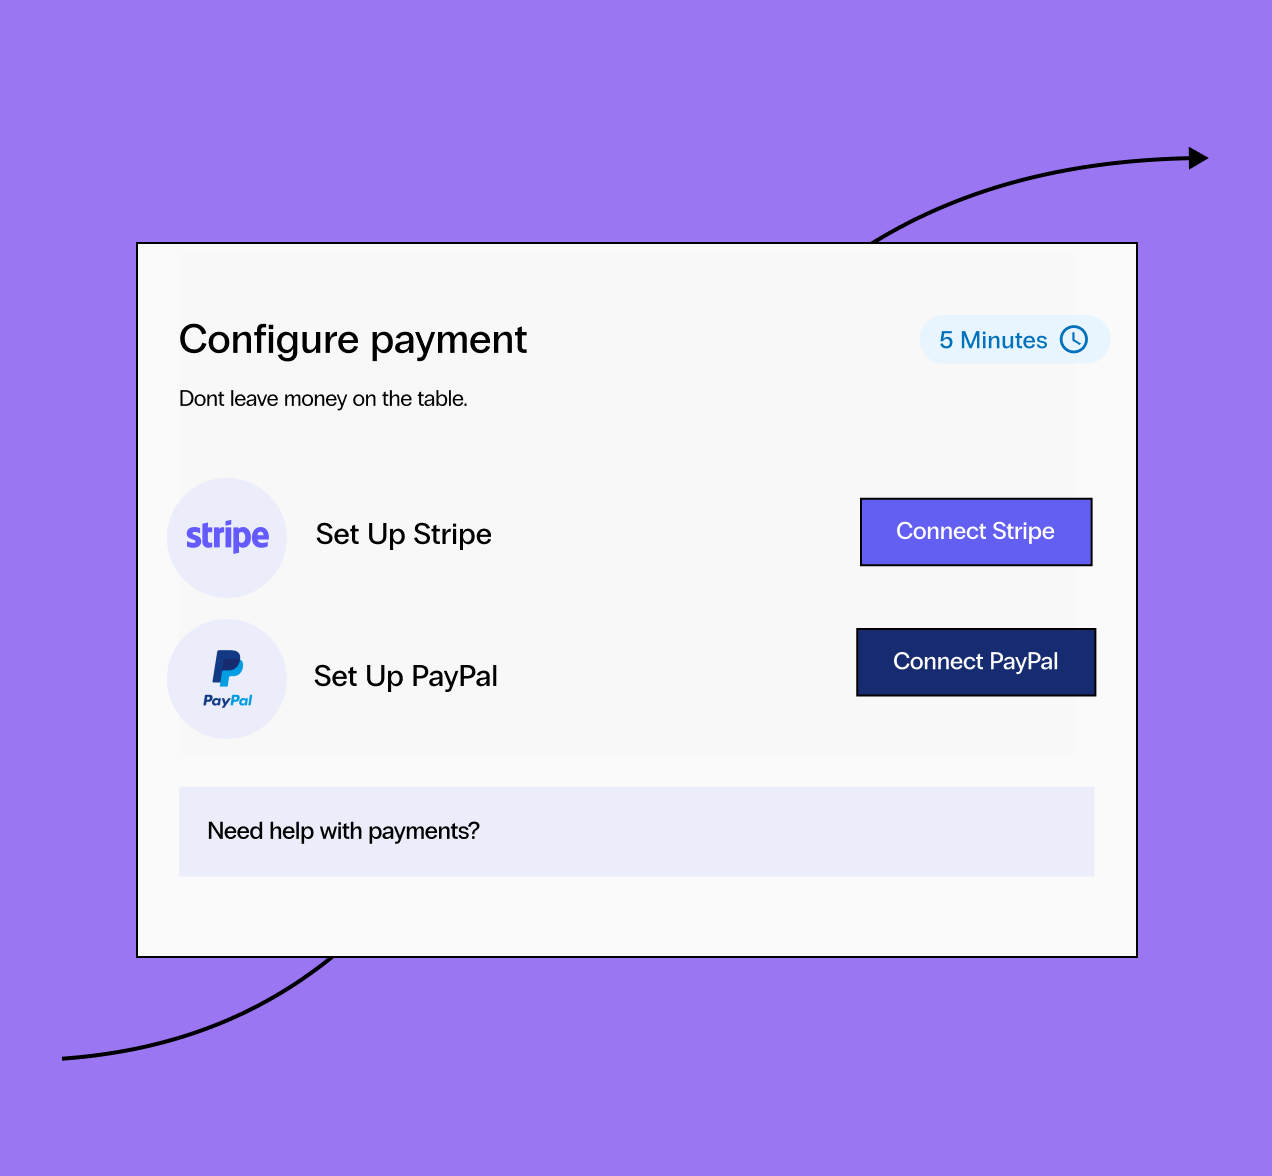 The configure payment step for WooCommerce, says don’t leave money on the table, takes 5 minutes, buttons to connect Stripe and PayPal